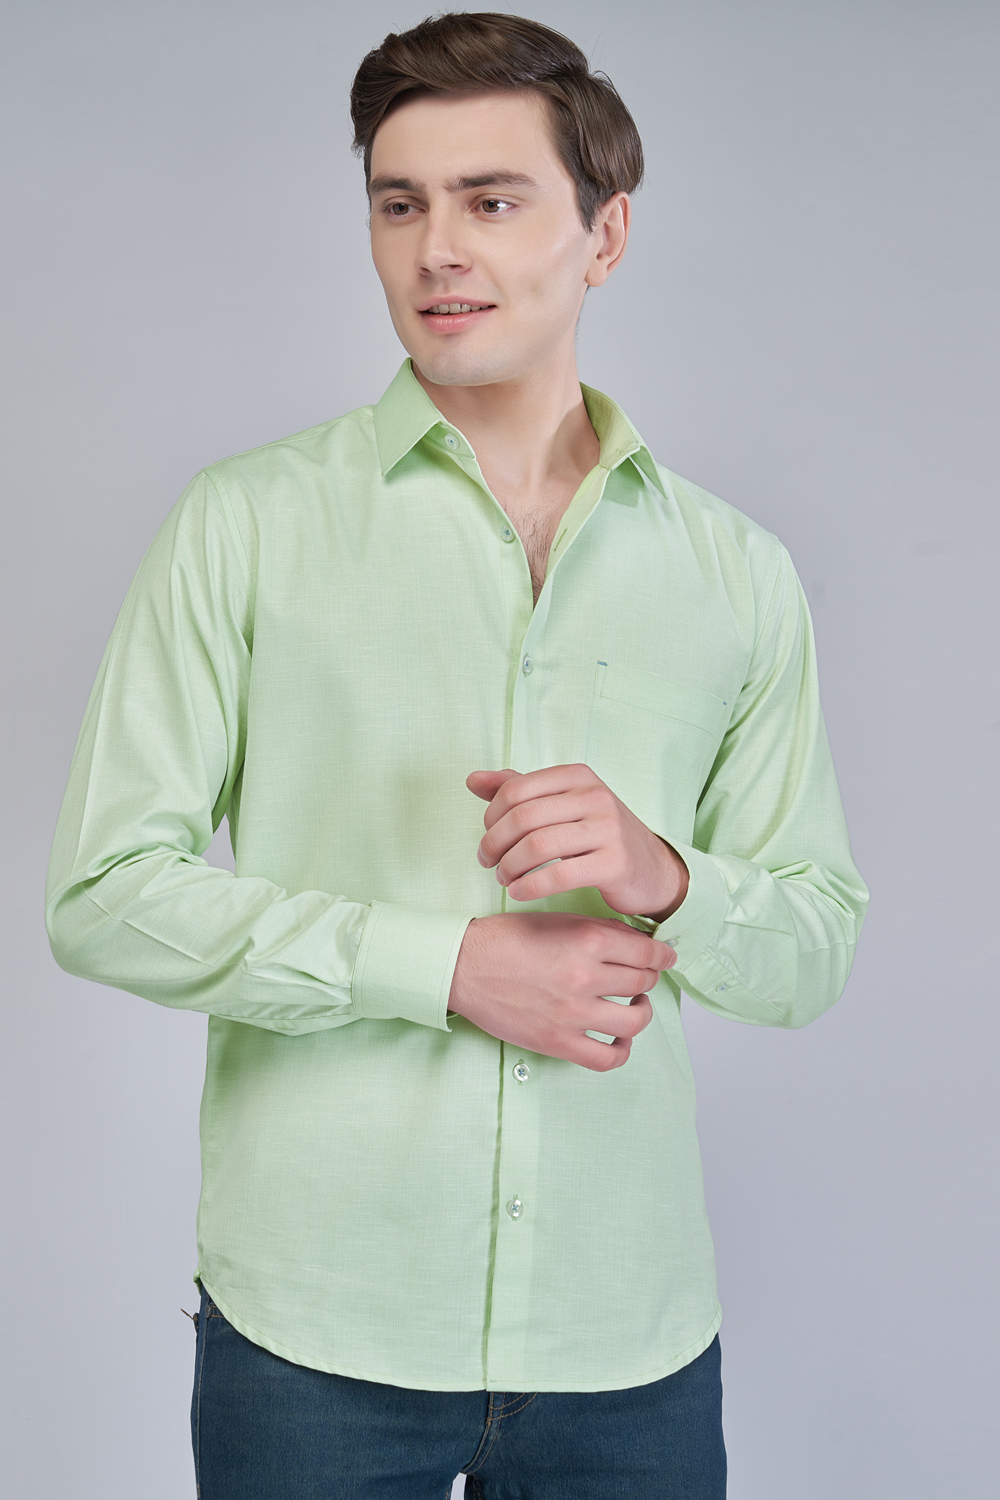 Office Casual Shirt for Men